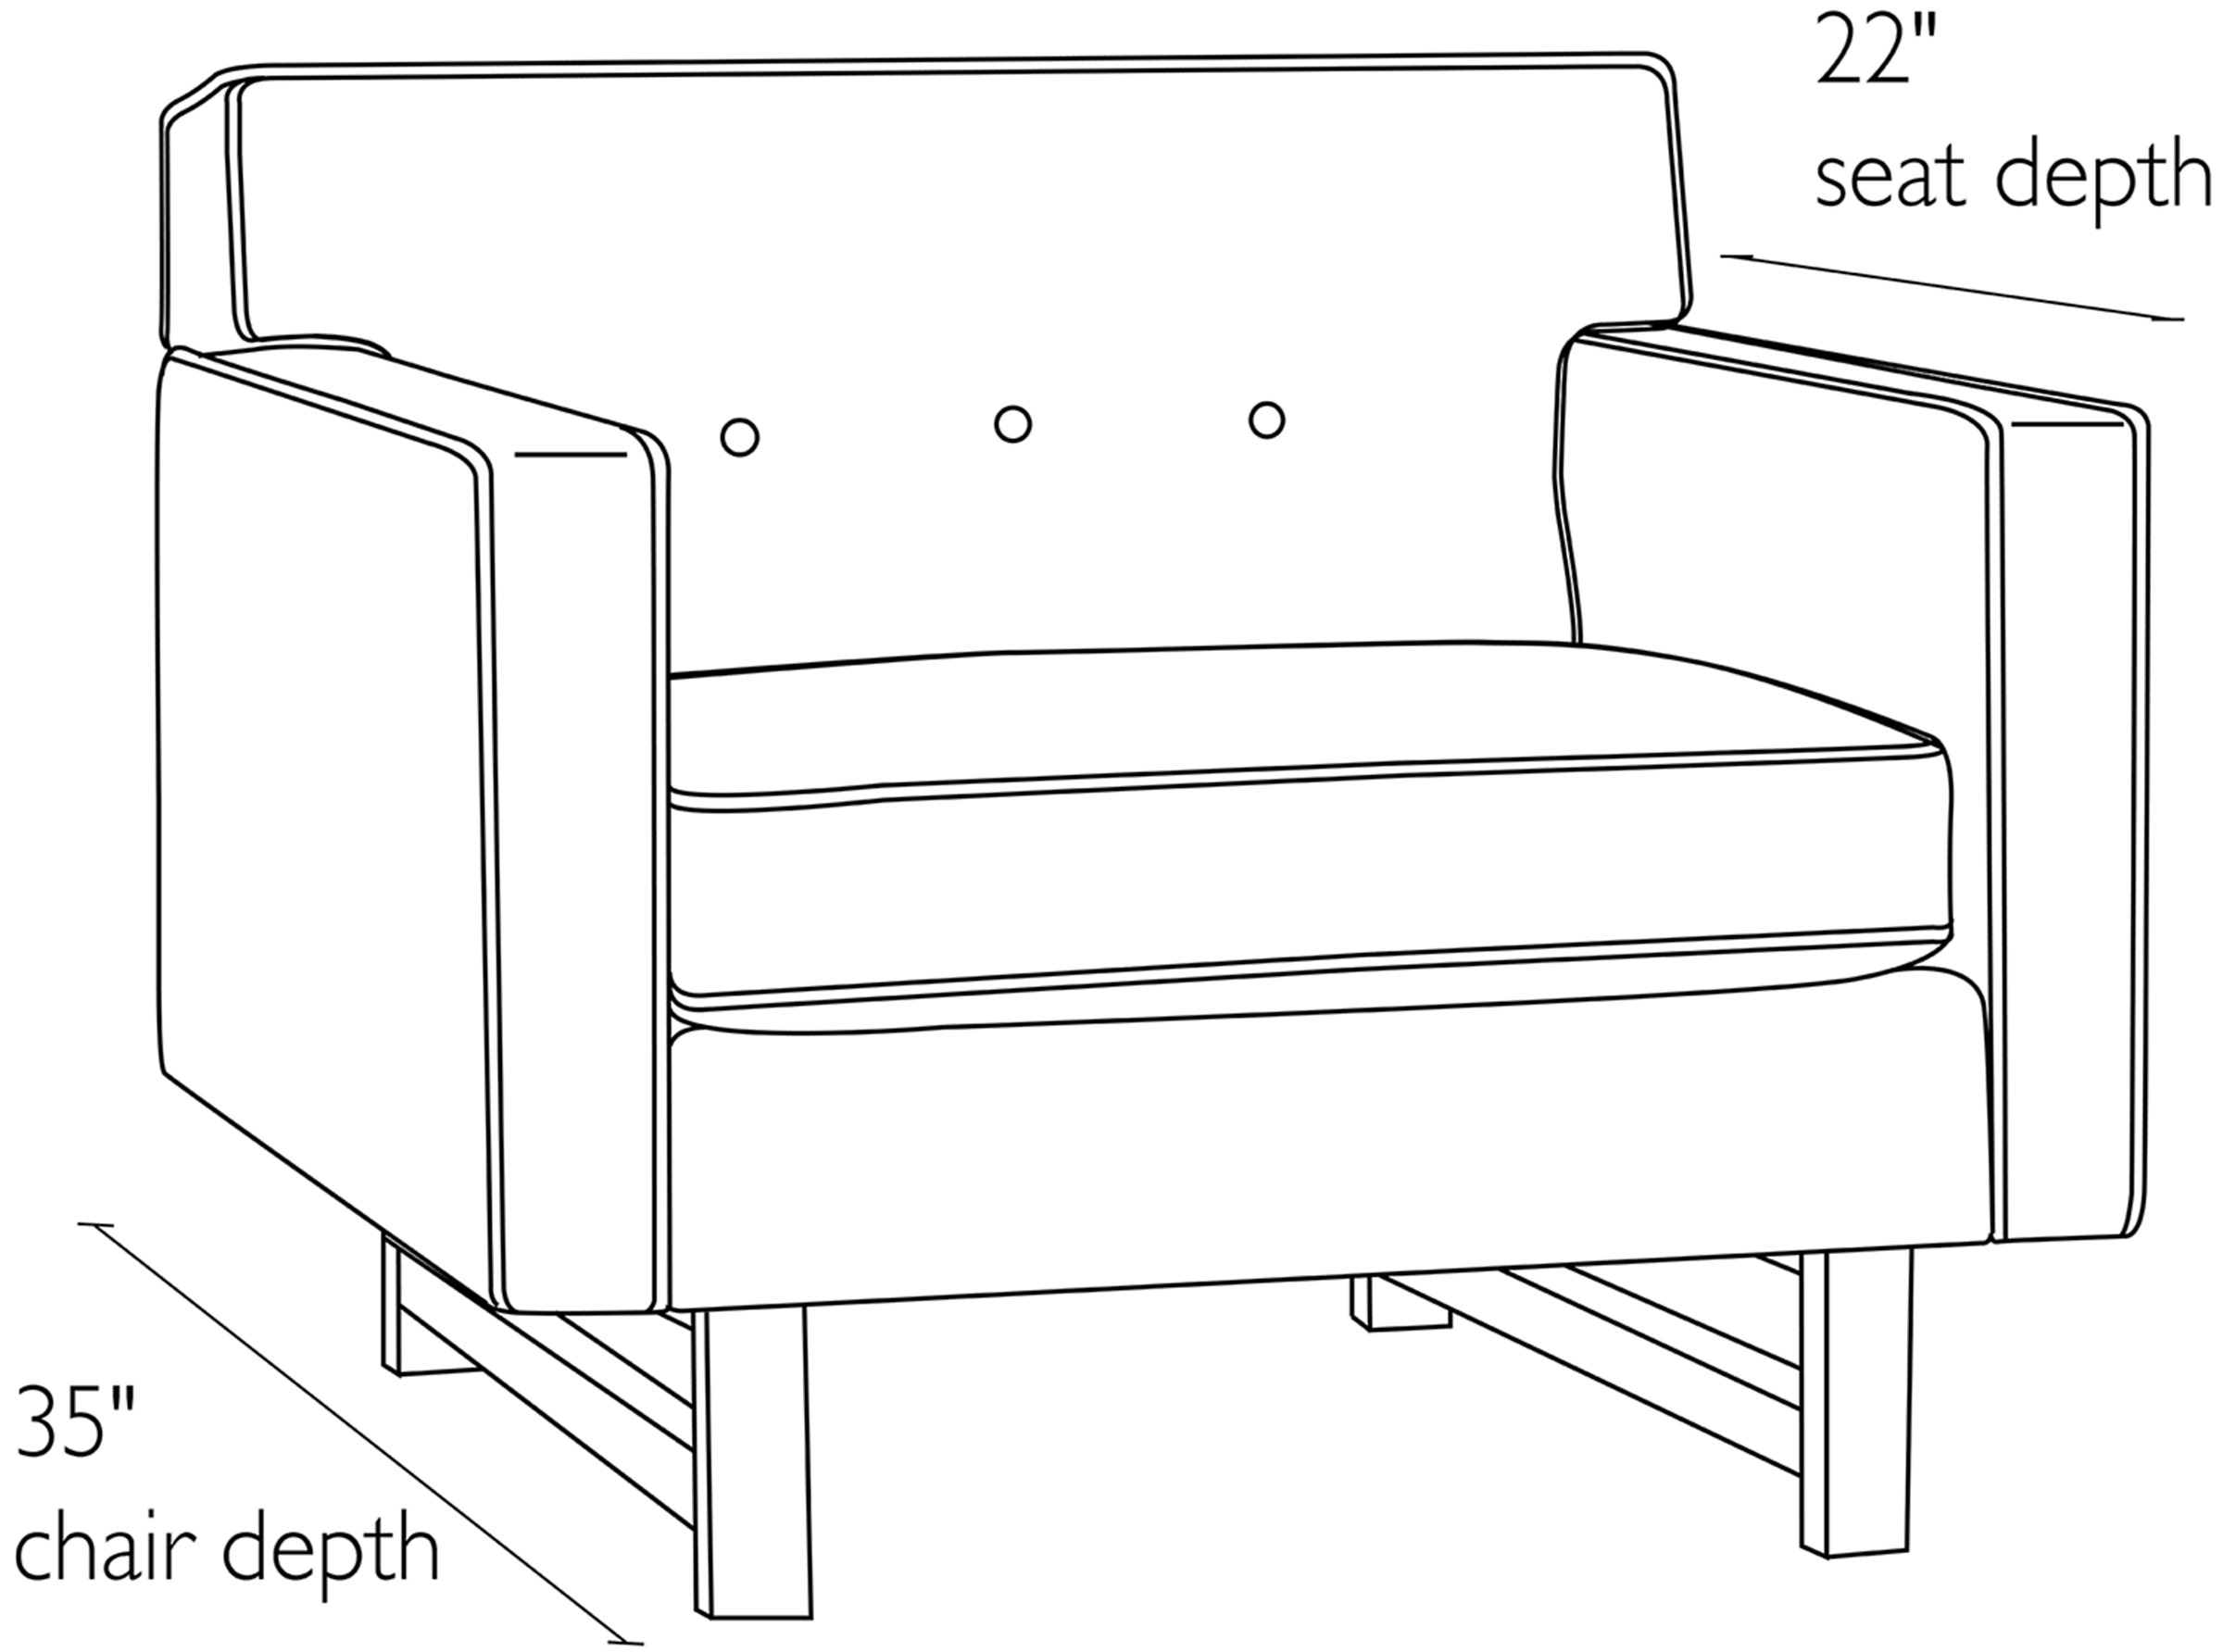 Side view dimension illustration of Andre chair.